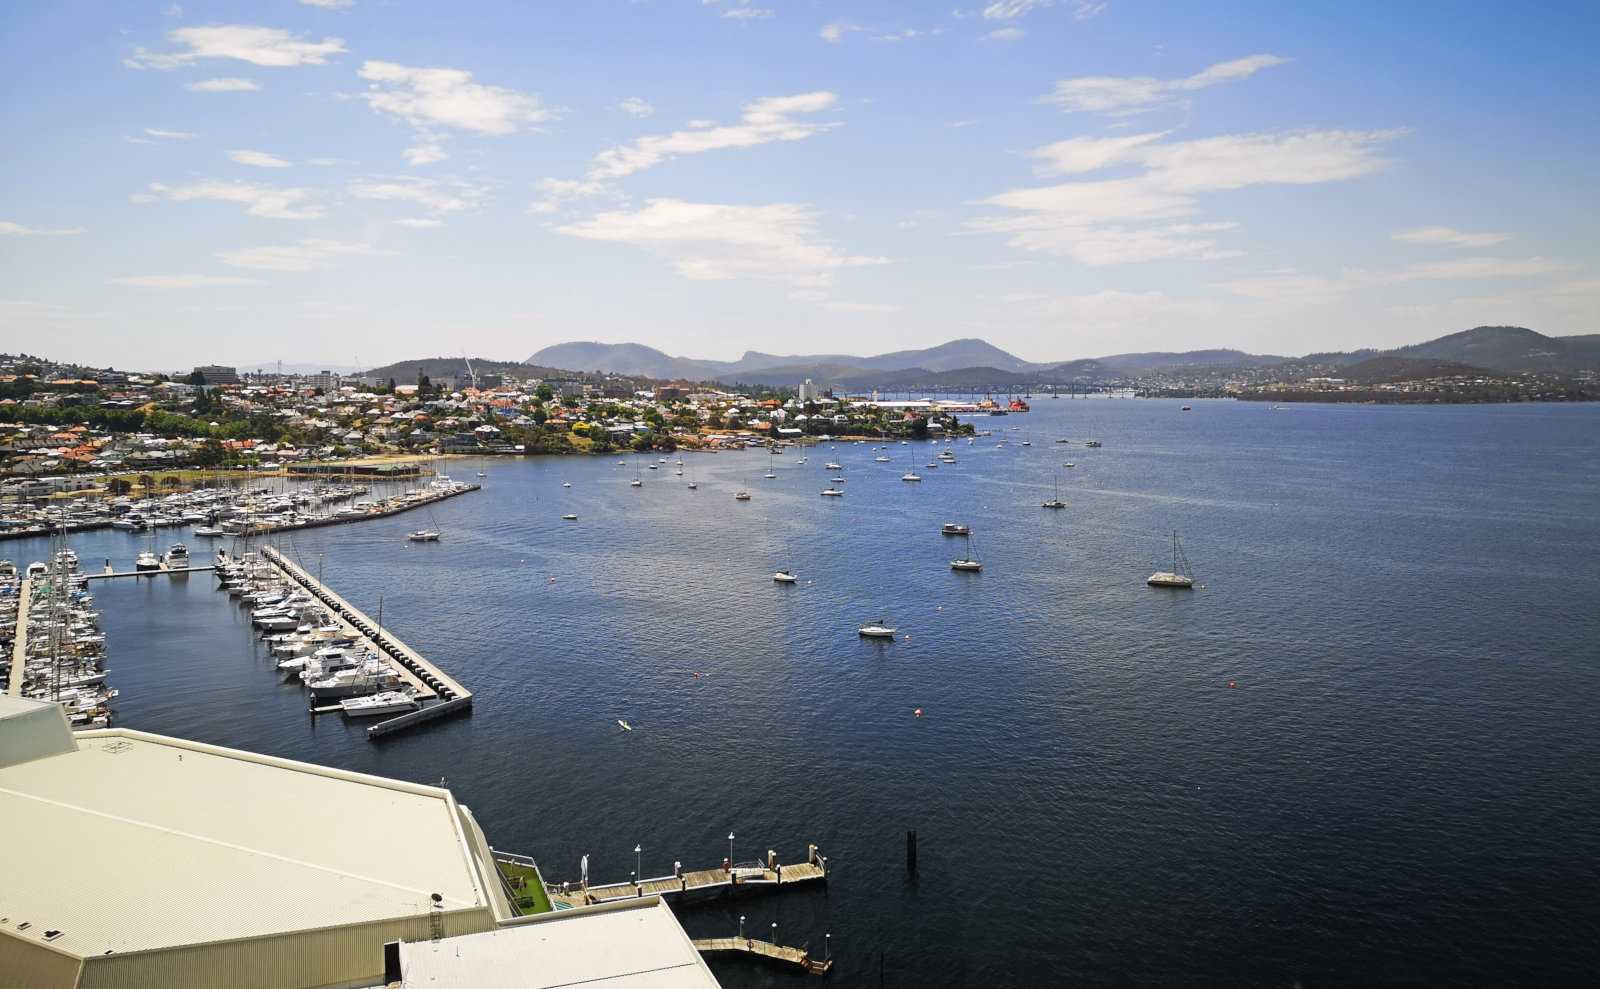 Staying at the Wrest Point Hotel and Casino in Hobart, Tasmania